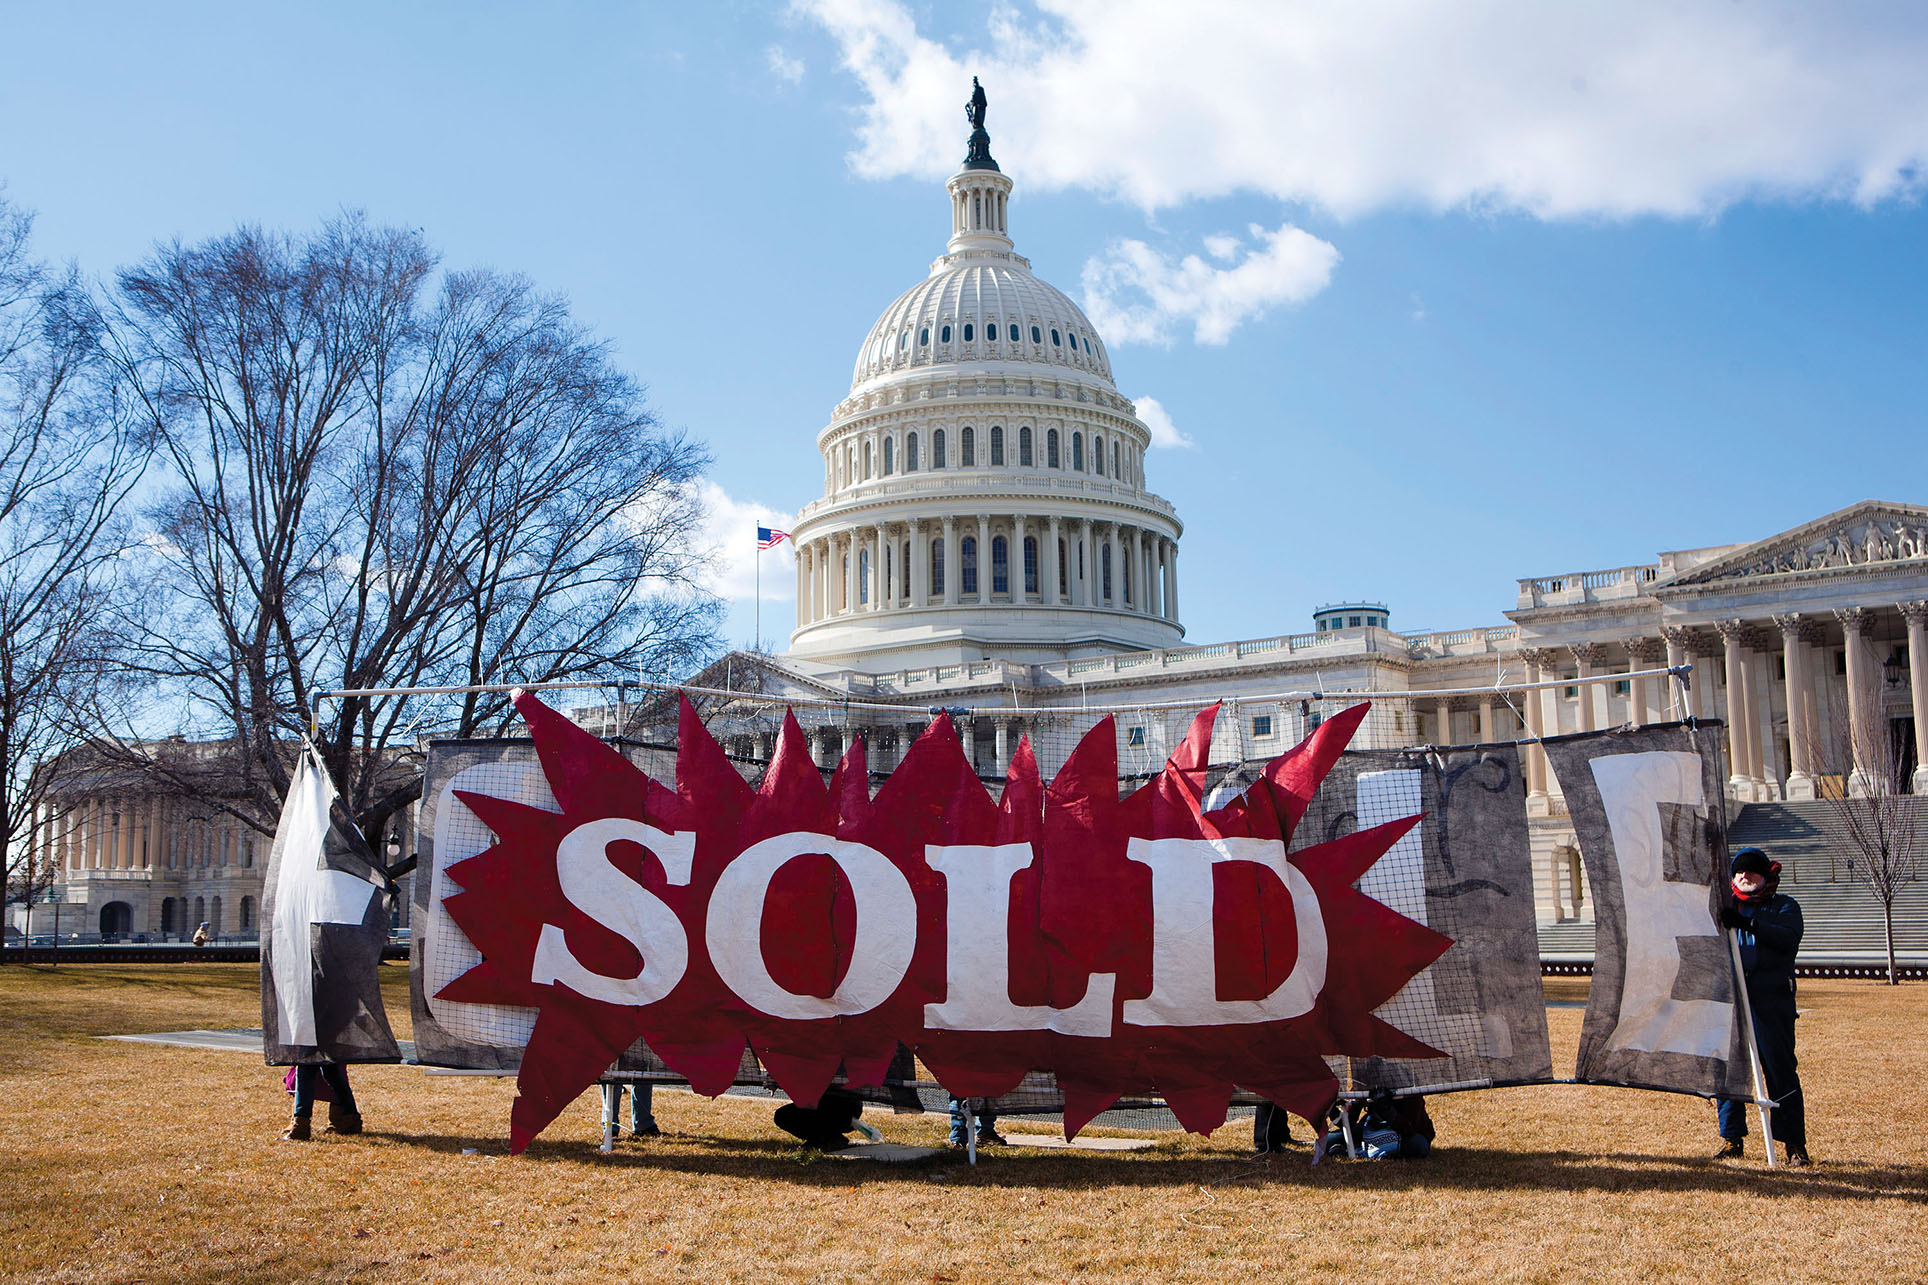 A "Sold" sign in front of the U.S. Capitol at a rally for a constitutional amendment to overturn the Citizens United Supreme Court decision. (Photo by Brendan Hoffman.)